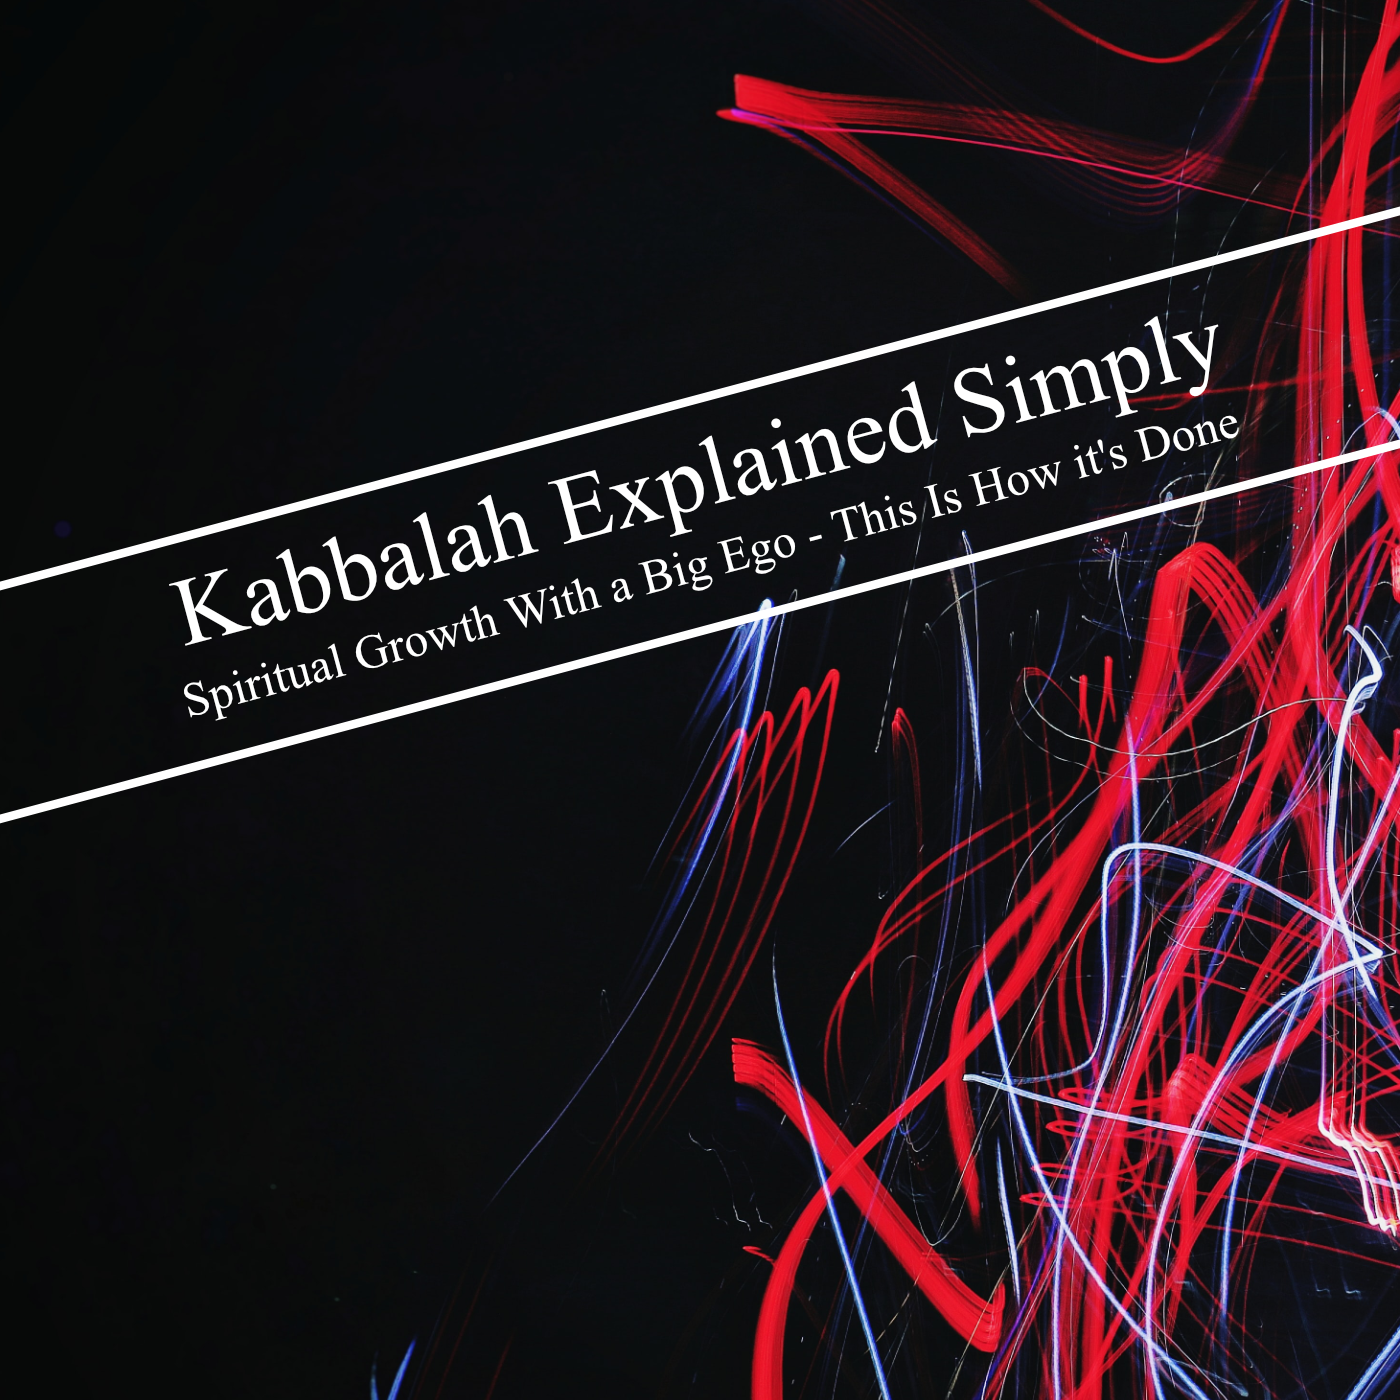 Kabbalah Explained Simply - Spiritual Growth With a Big Ego - This Is How it’s Done